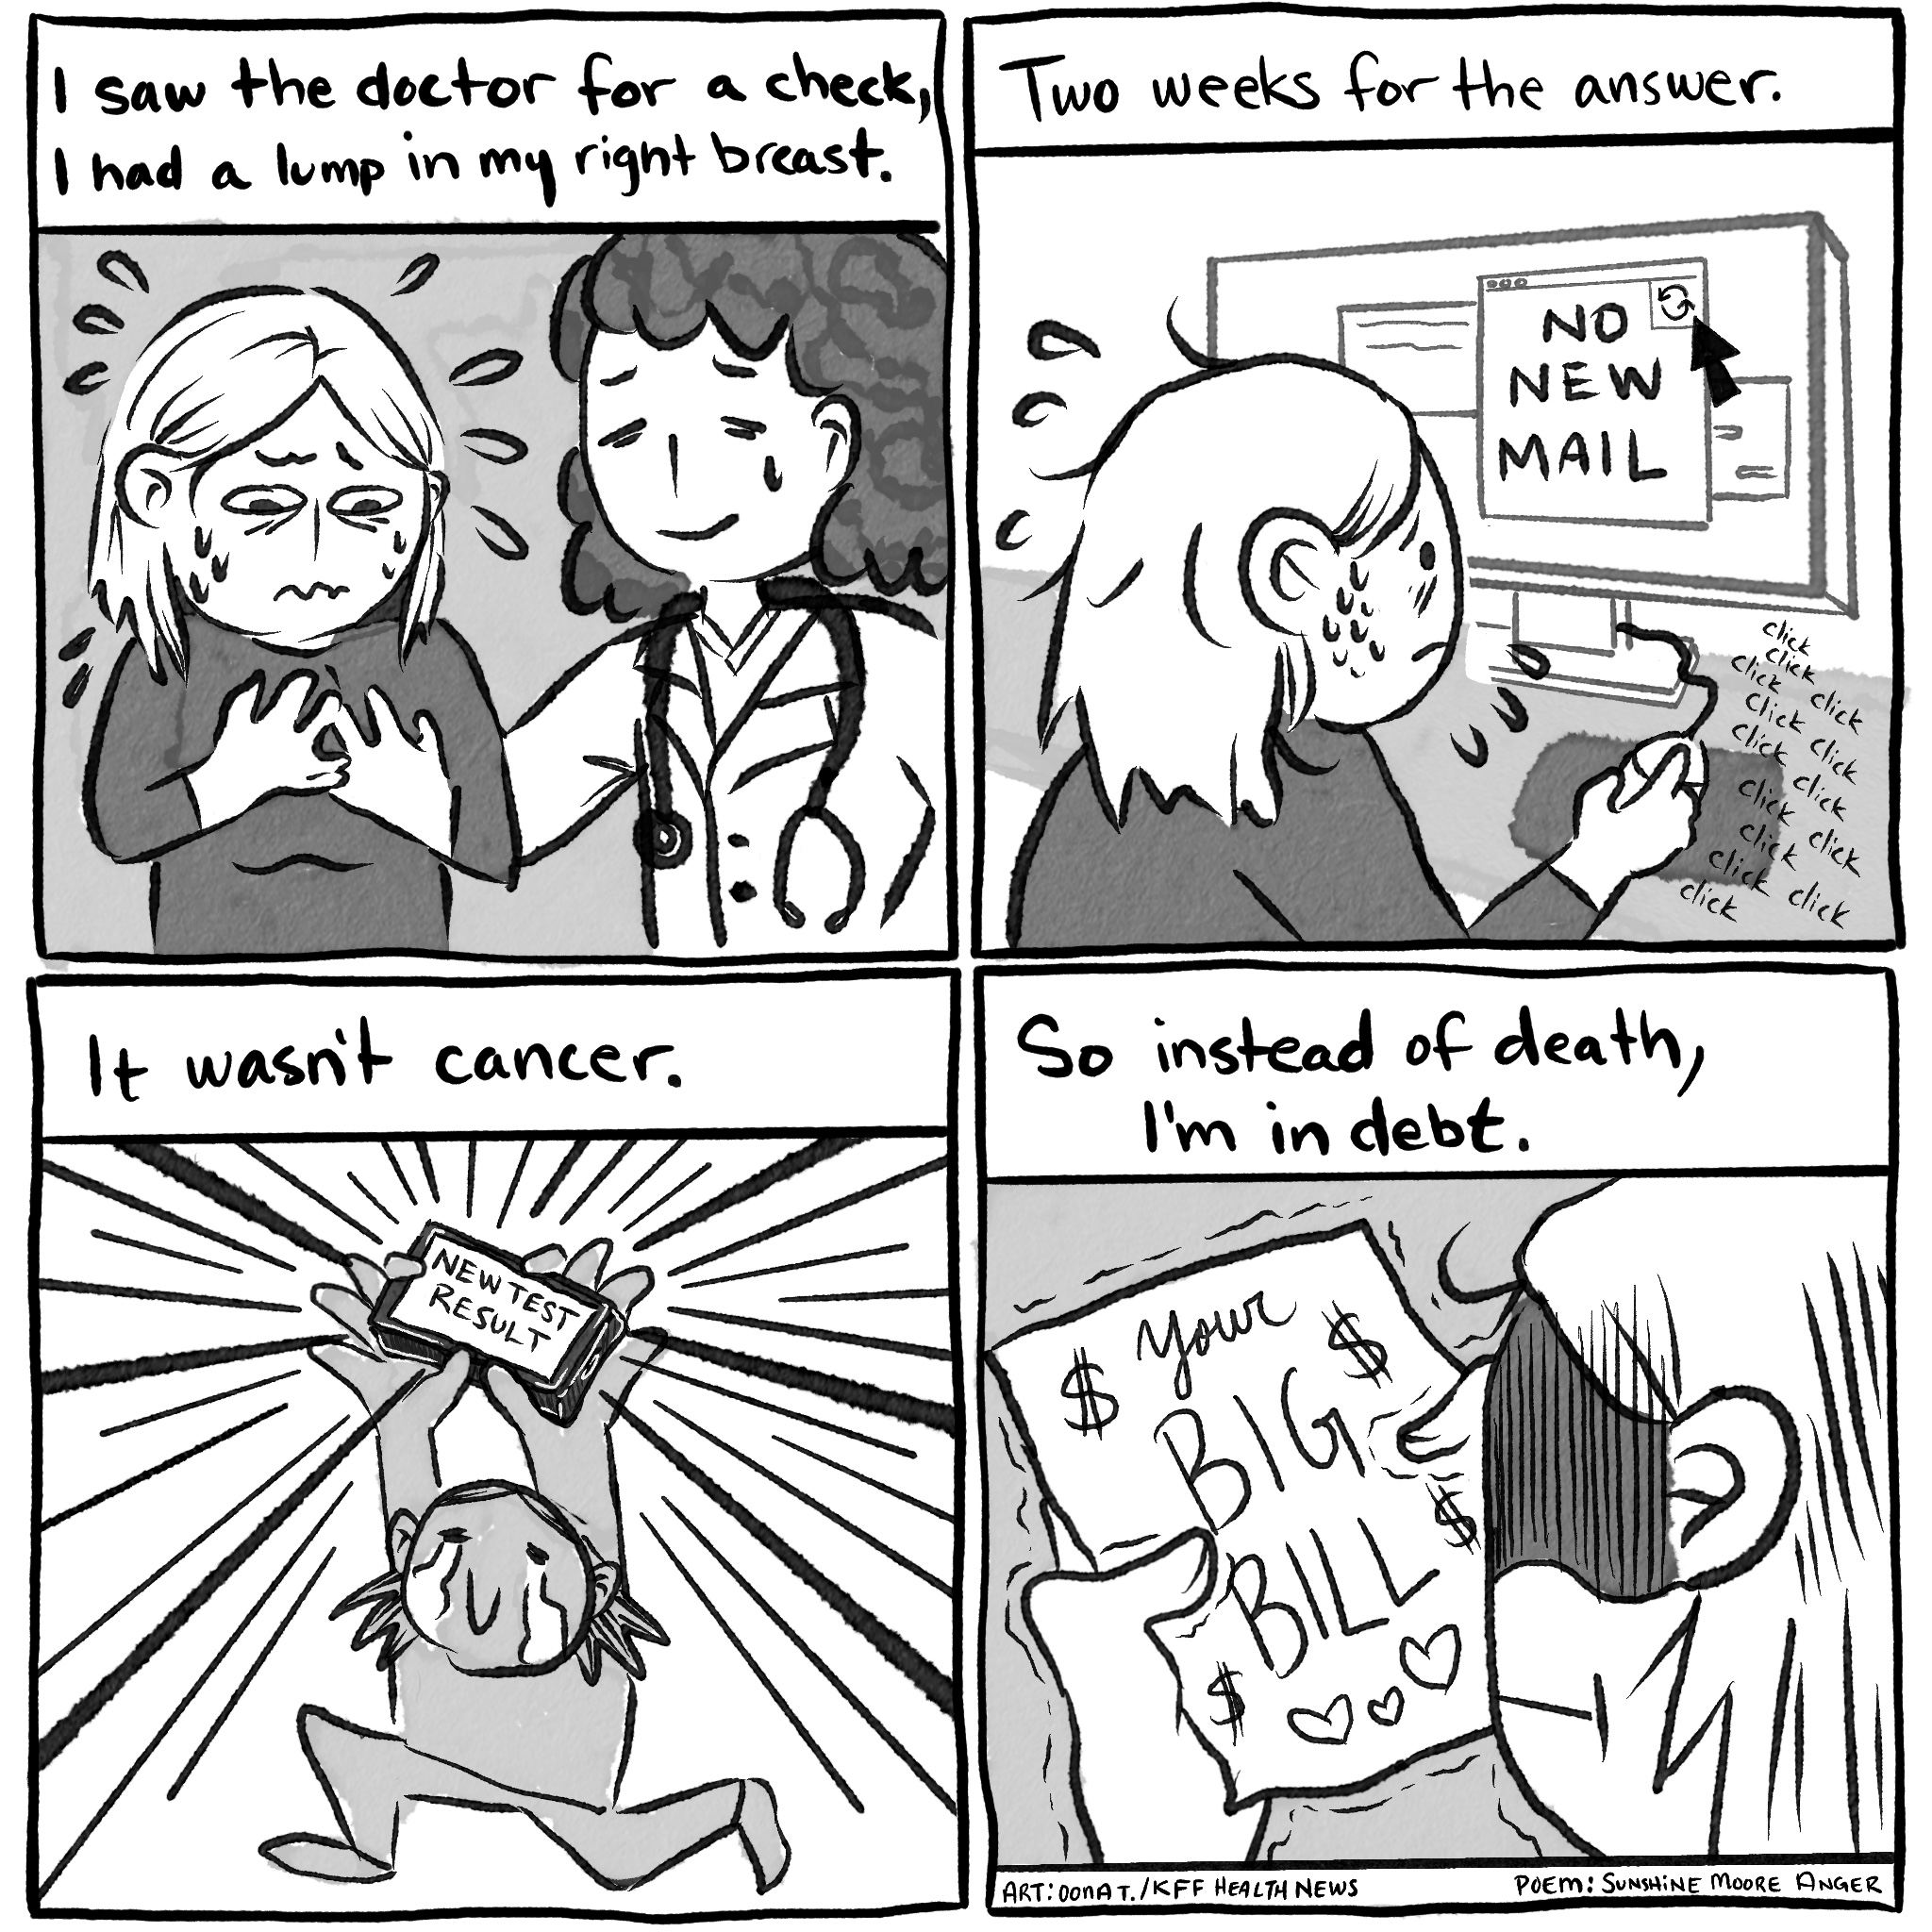 A four-panel, black and white comic. The first panel reads, “I saw the doctor for a check, I had a lump in my right breast,” and shows a woman standing nervously beside her doctor. The second panel reads, “Two weeks for the answer,” and shows the same woman sitting at a computer, nervously clicking a refresh button on her email, which reads, “NO NEW MAIL.” The third panel reads, “It wasn’t cancer,” and shows the woman triumphantly holding up her phone with the test result while crying tears of joy. The fourth and final panel reads, “So instead of death, I’m in debt,” and shows her holding a medical bill in her hands, which tremble as she reads from it, “Your BIG BILL.”